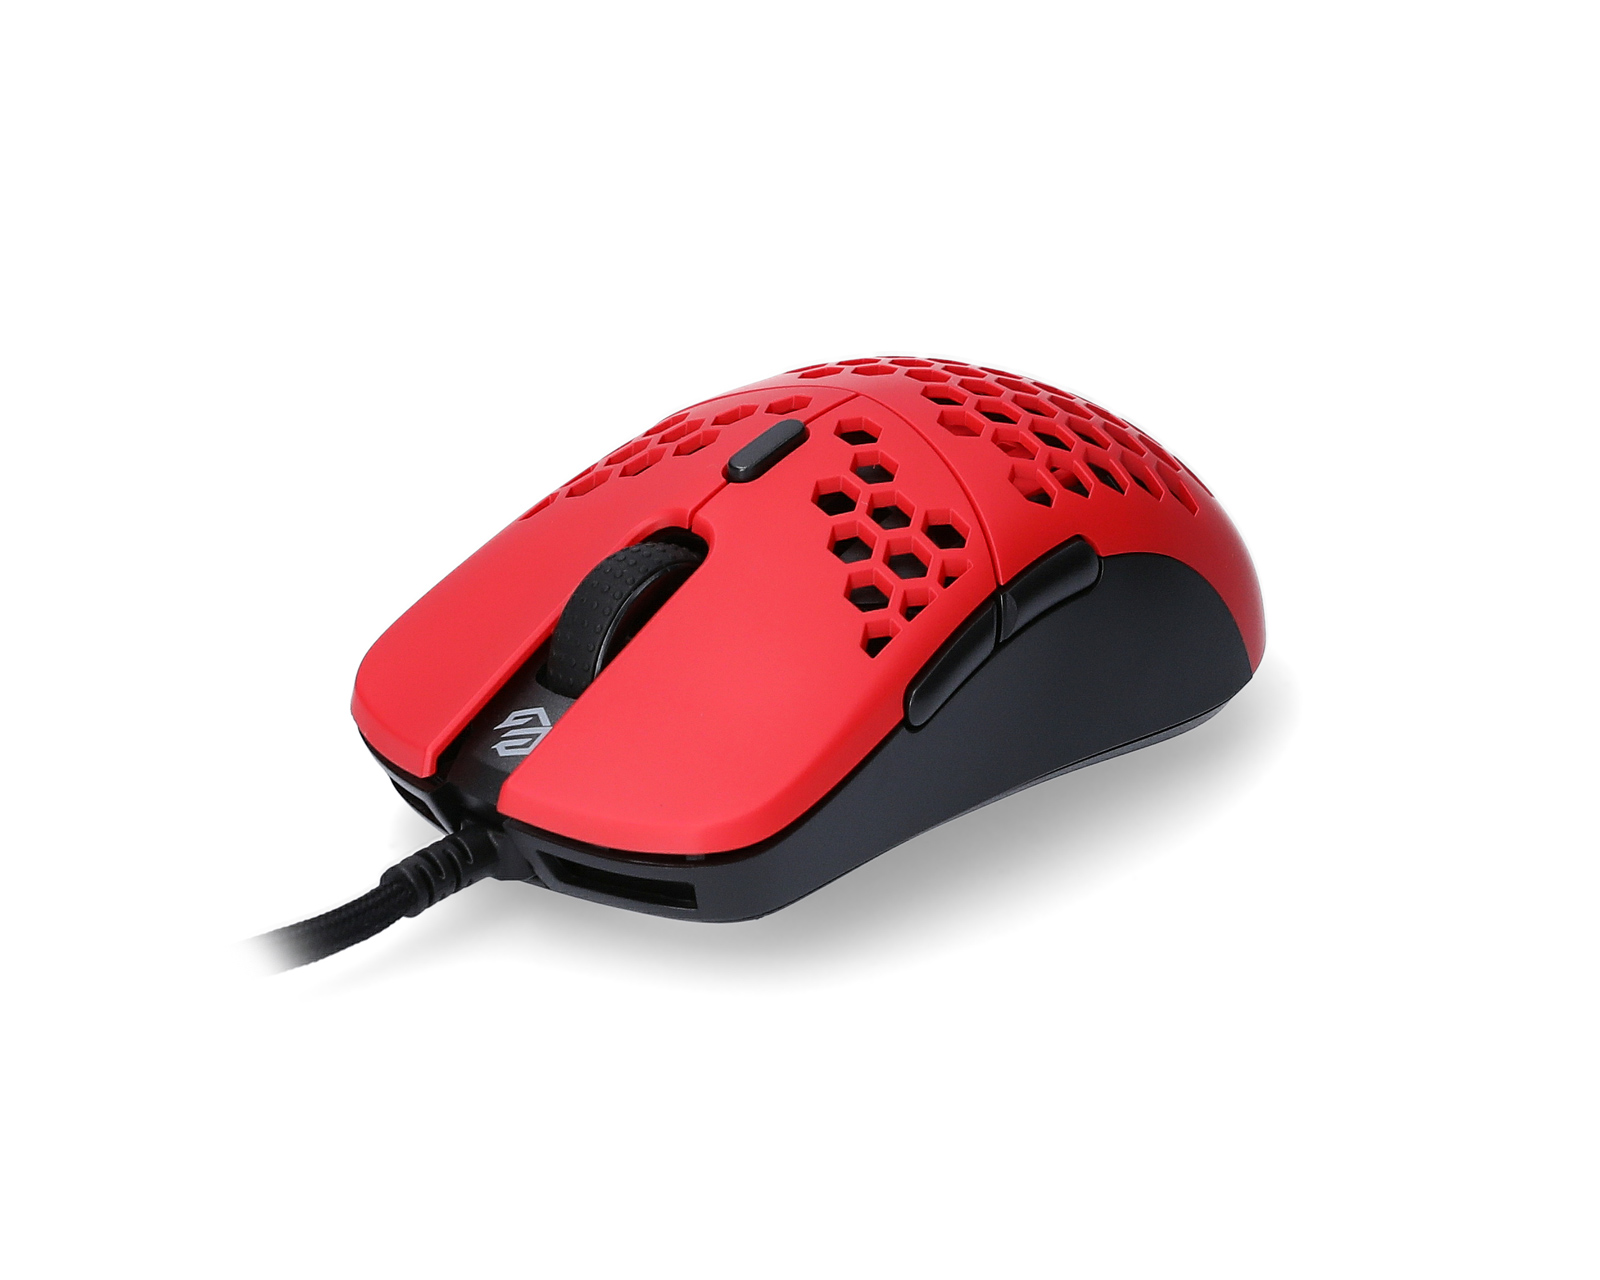 G-Wolves Hati S Gaming Mouse Red/Black